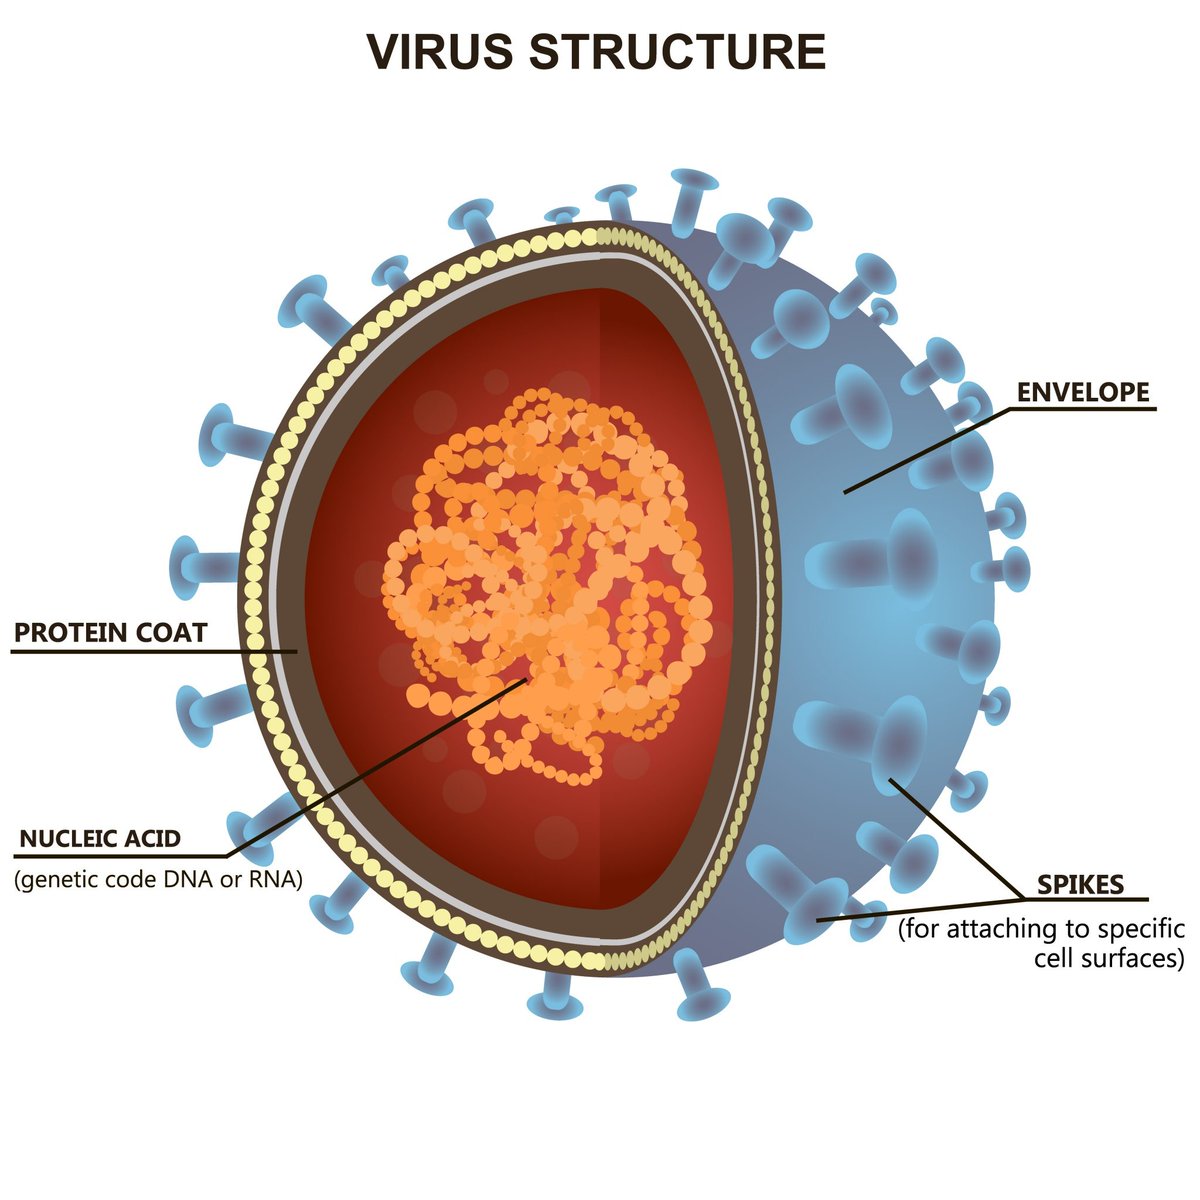 The Lateral Flow test does not test for a virus particle, pictured below, but only for a specific protein in a virus called the N protein. Again, not the entire virus particle itself.